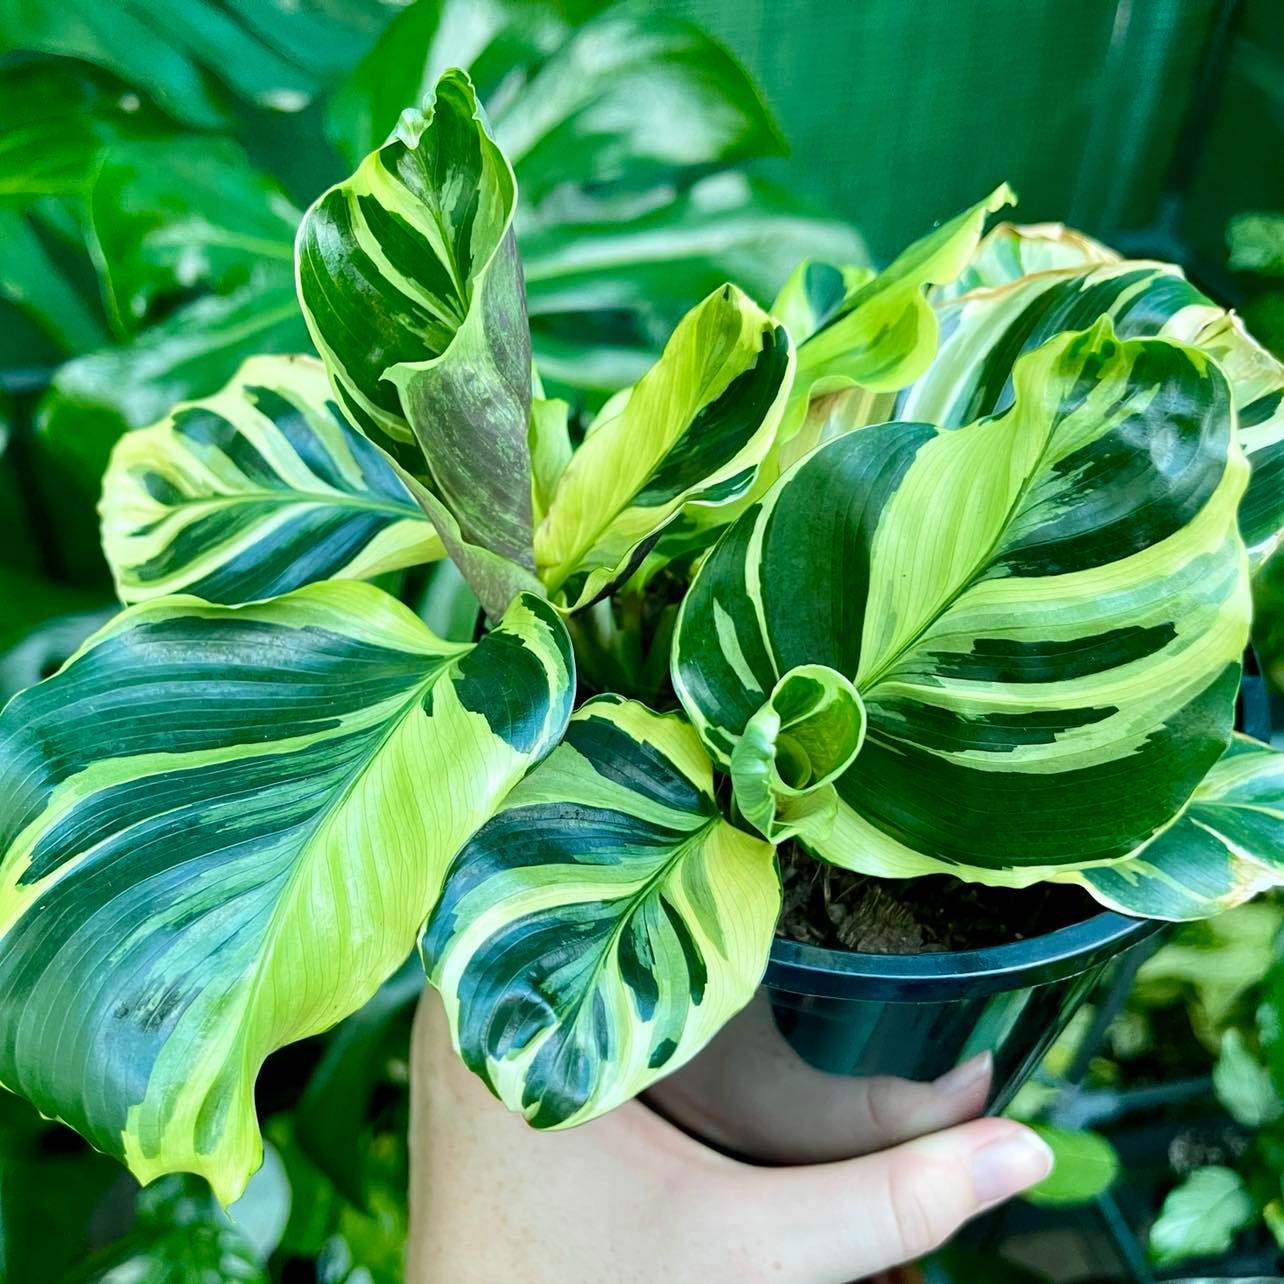 Calathea Louisae ‘Thai Beauty’ Care (Everything you need to know)